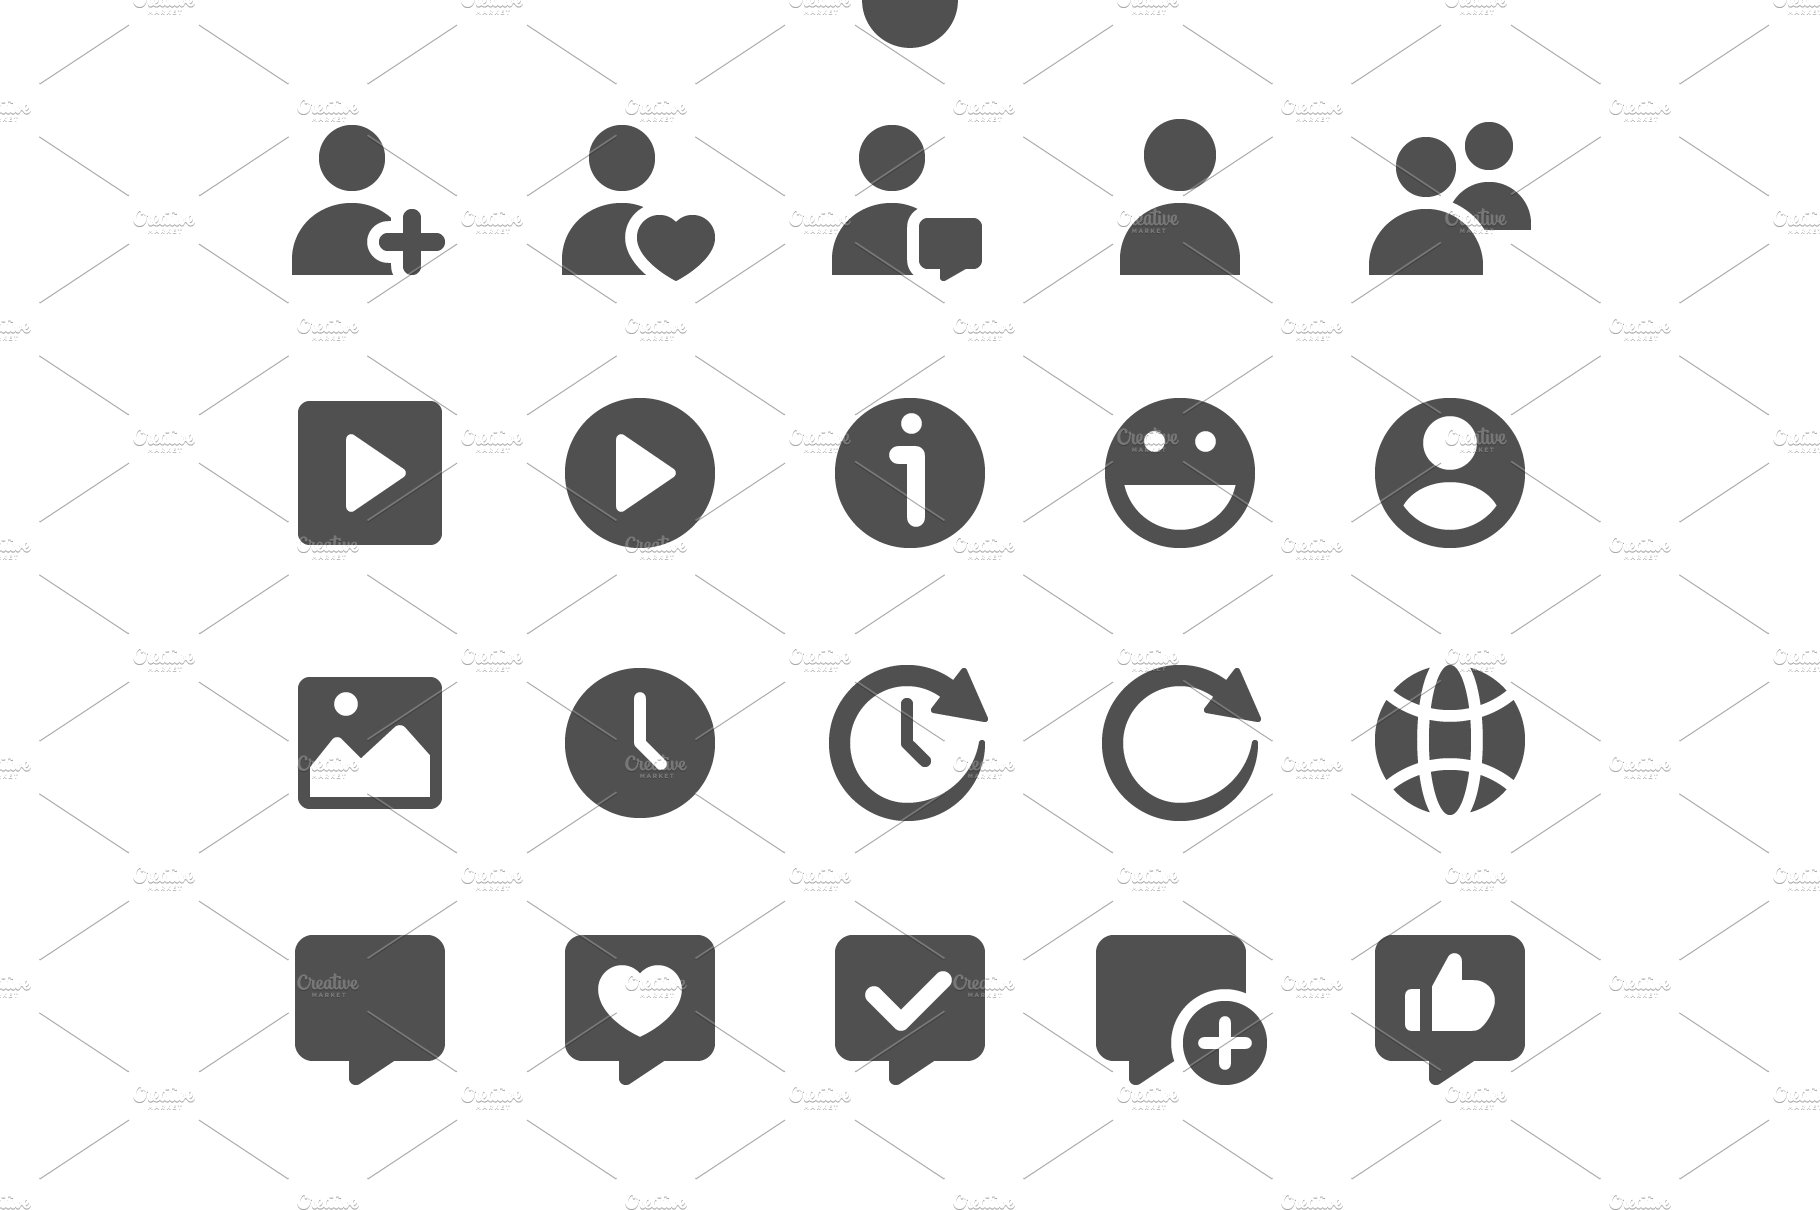 Social Icons cover image.